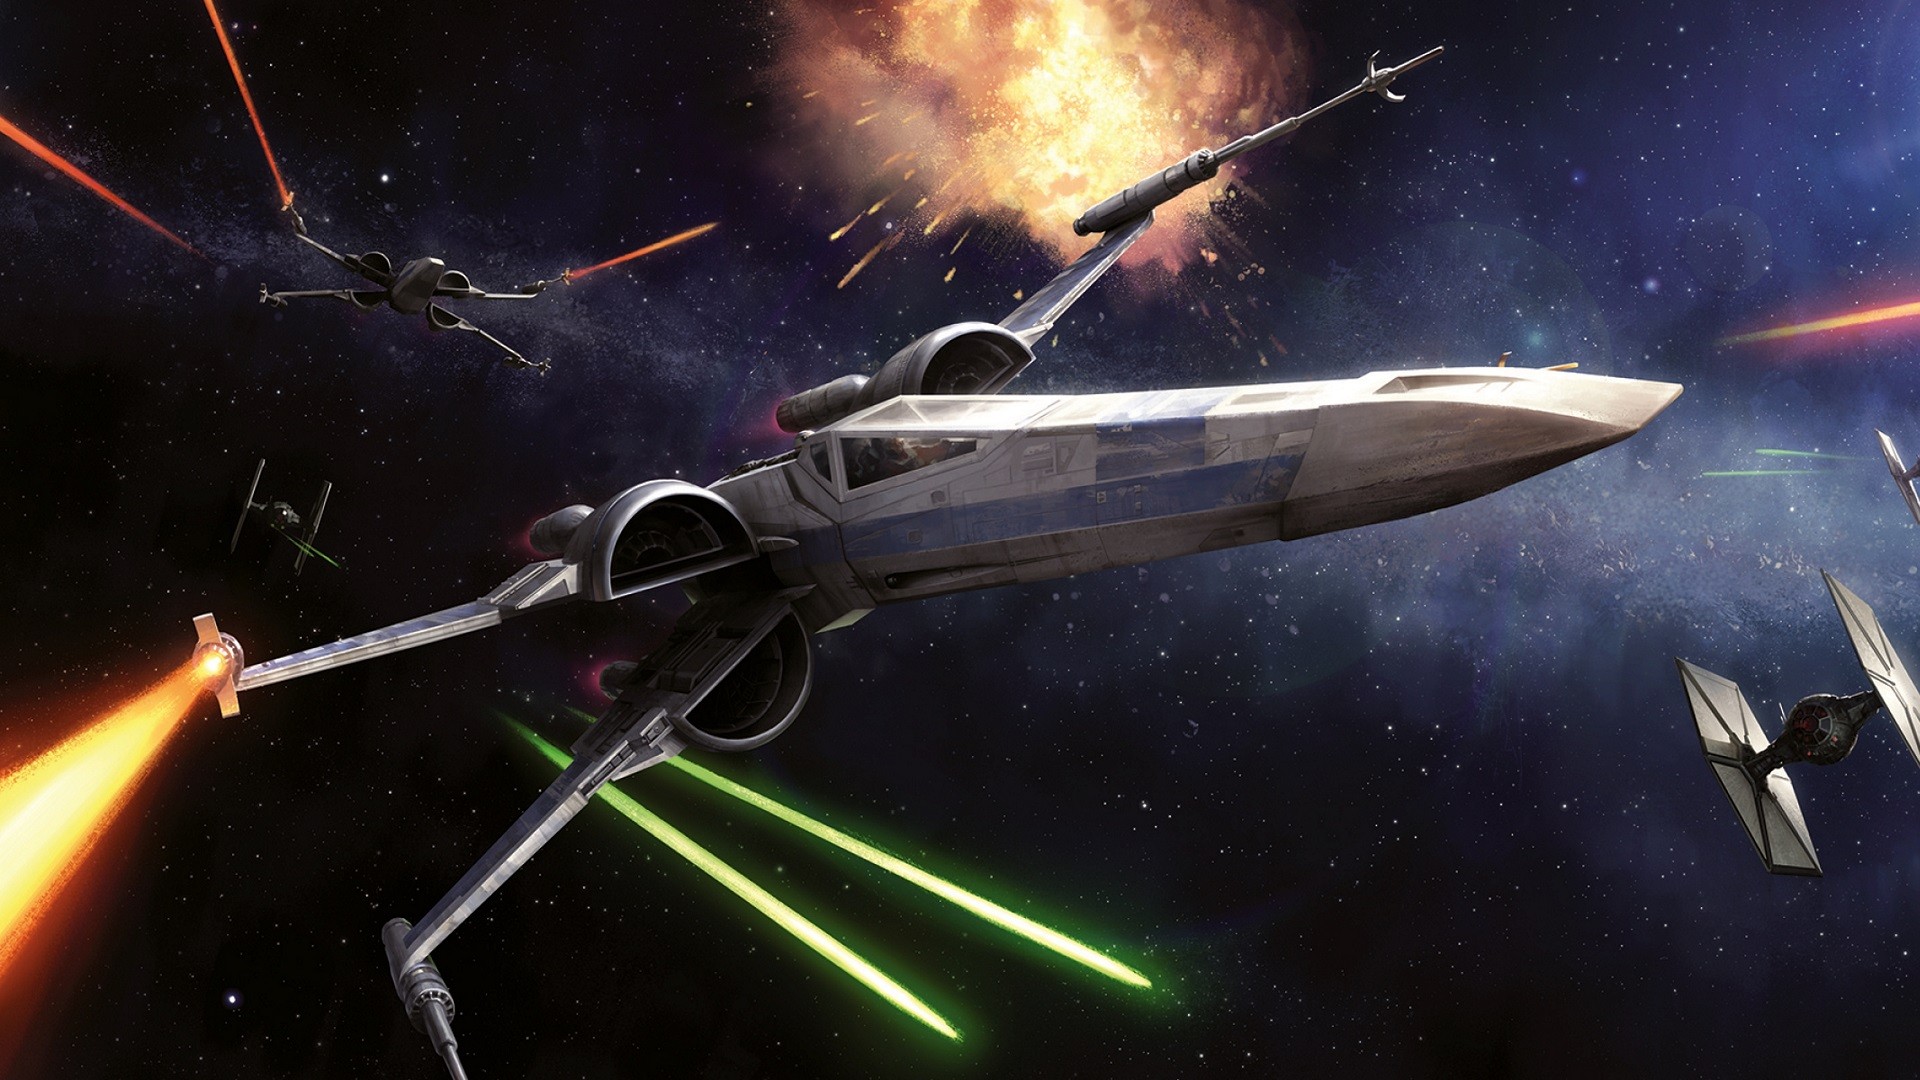 General 1920x1080 Star Wars space spaceship X-wing laser lasers science fiction artwork Star Wars Ships space battle